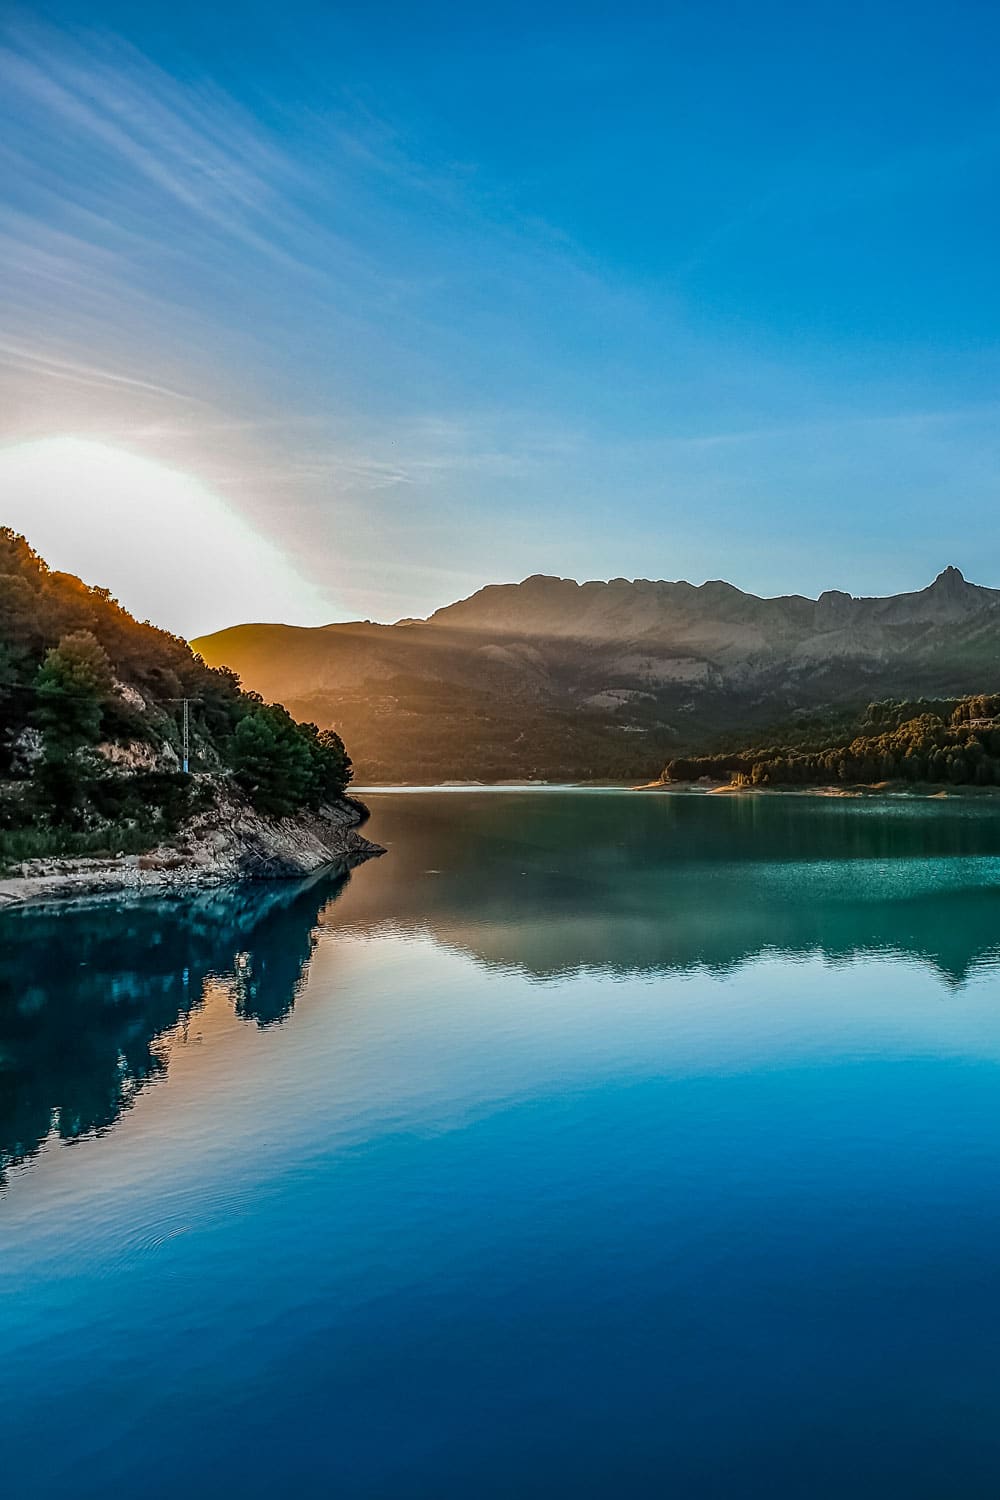 Early morning at Guadalest reservoir